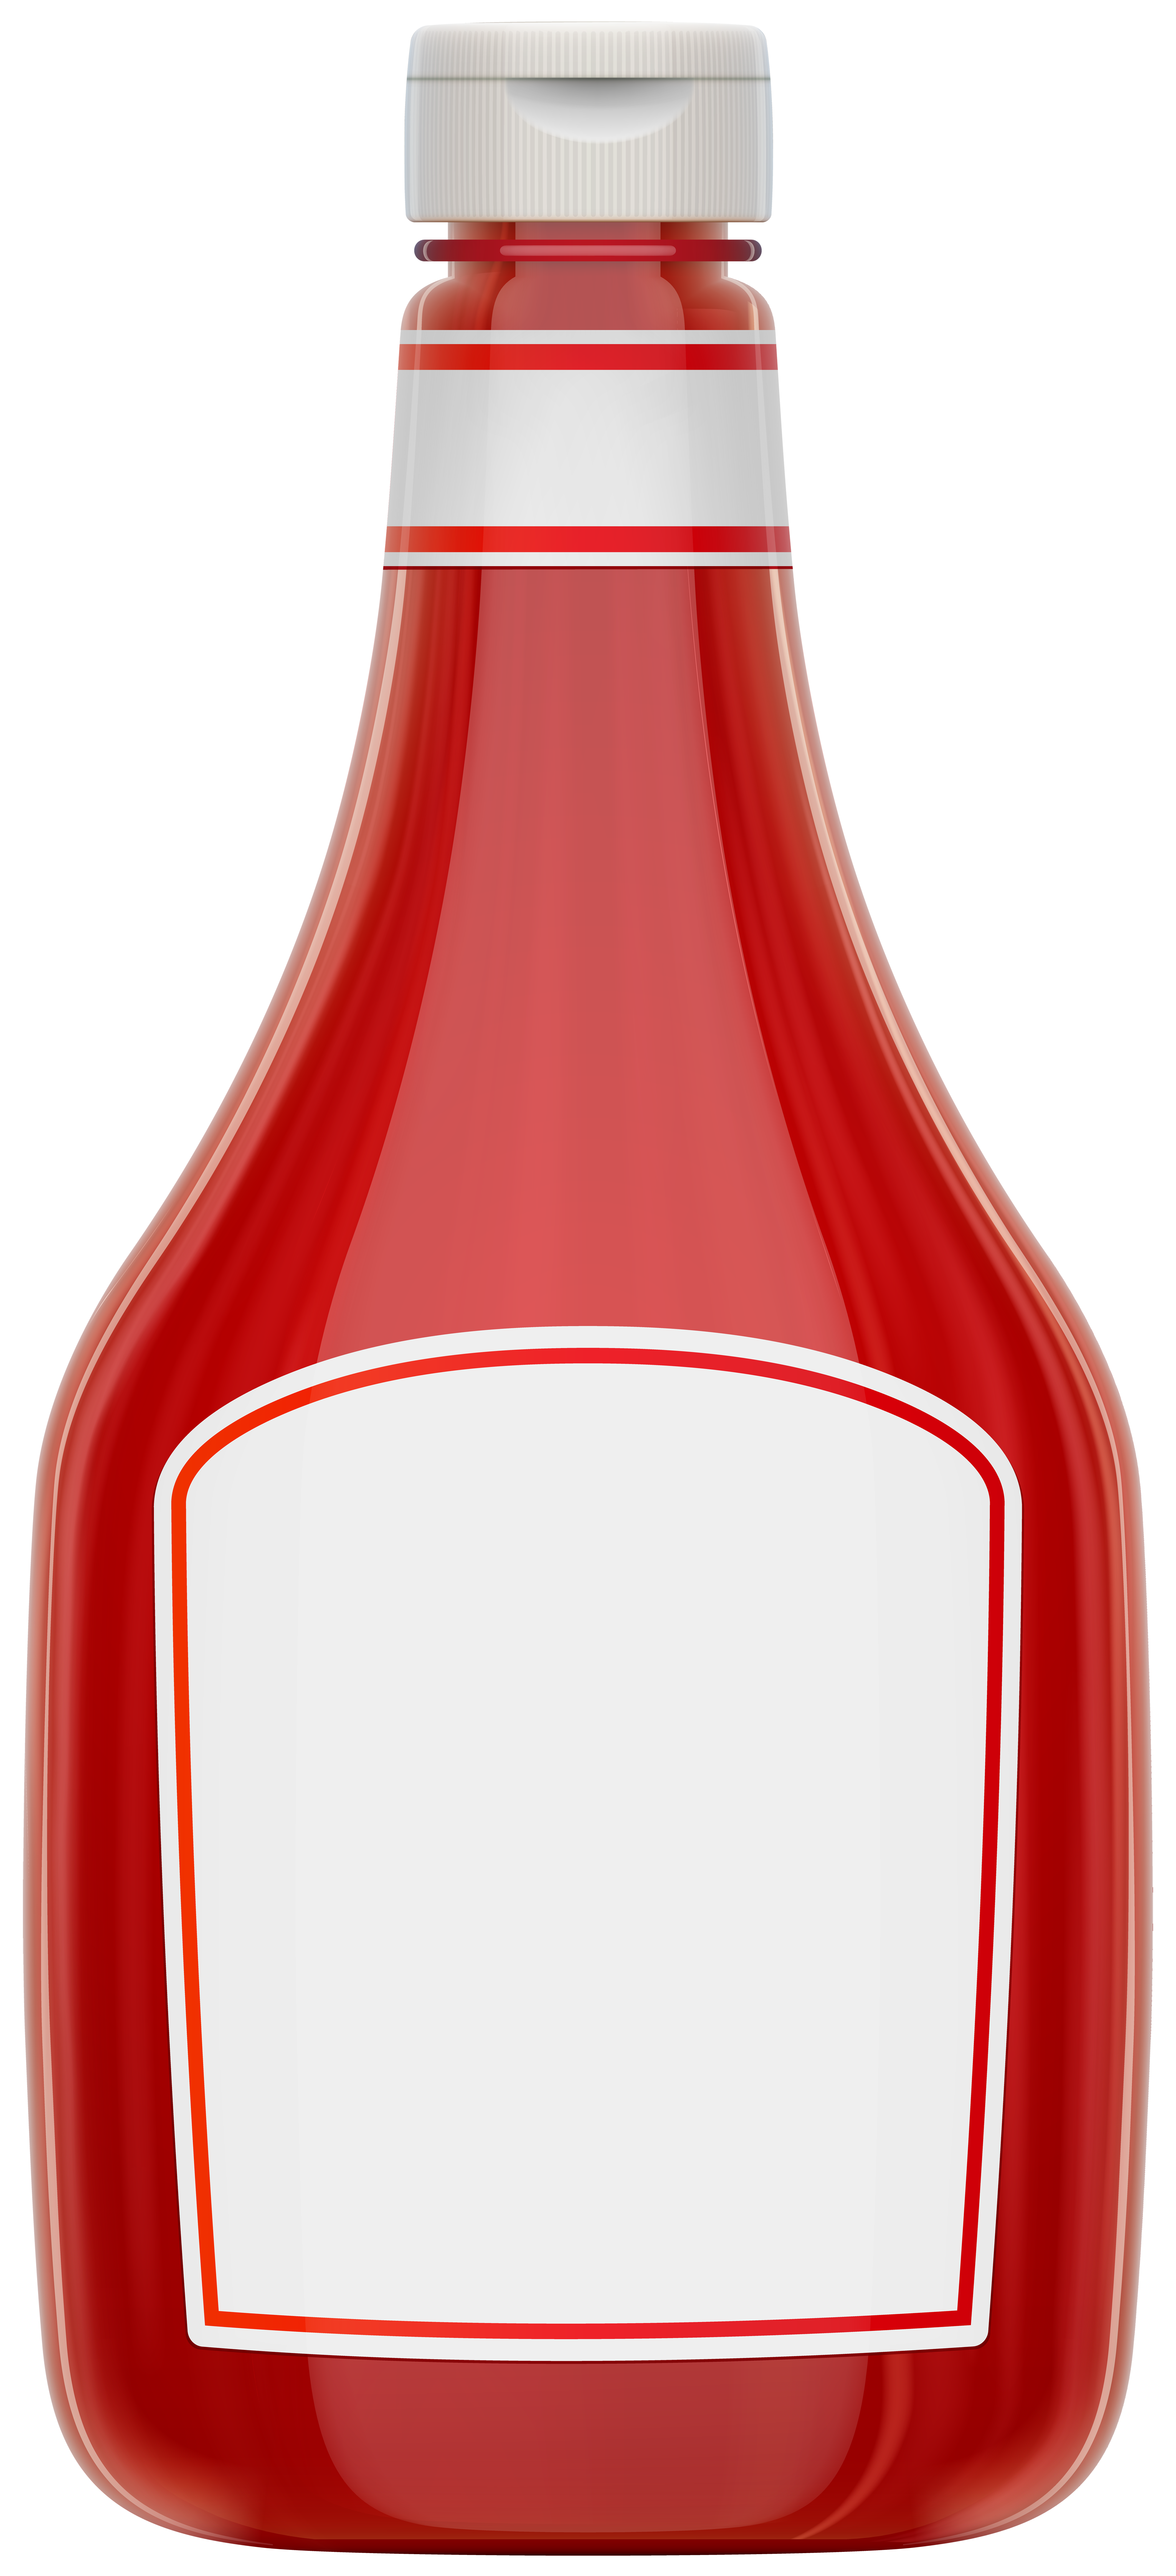 Ketchup Bottle Transparent Image Gallery Yopriceville High Quality Images And Transparent Png Free Clipart